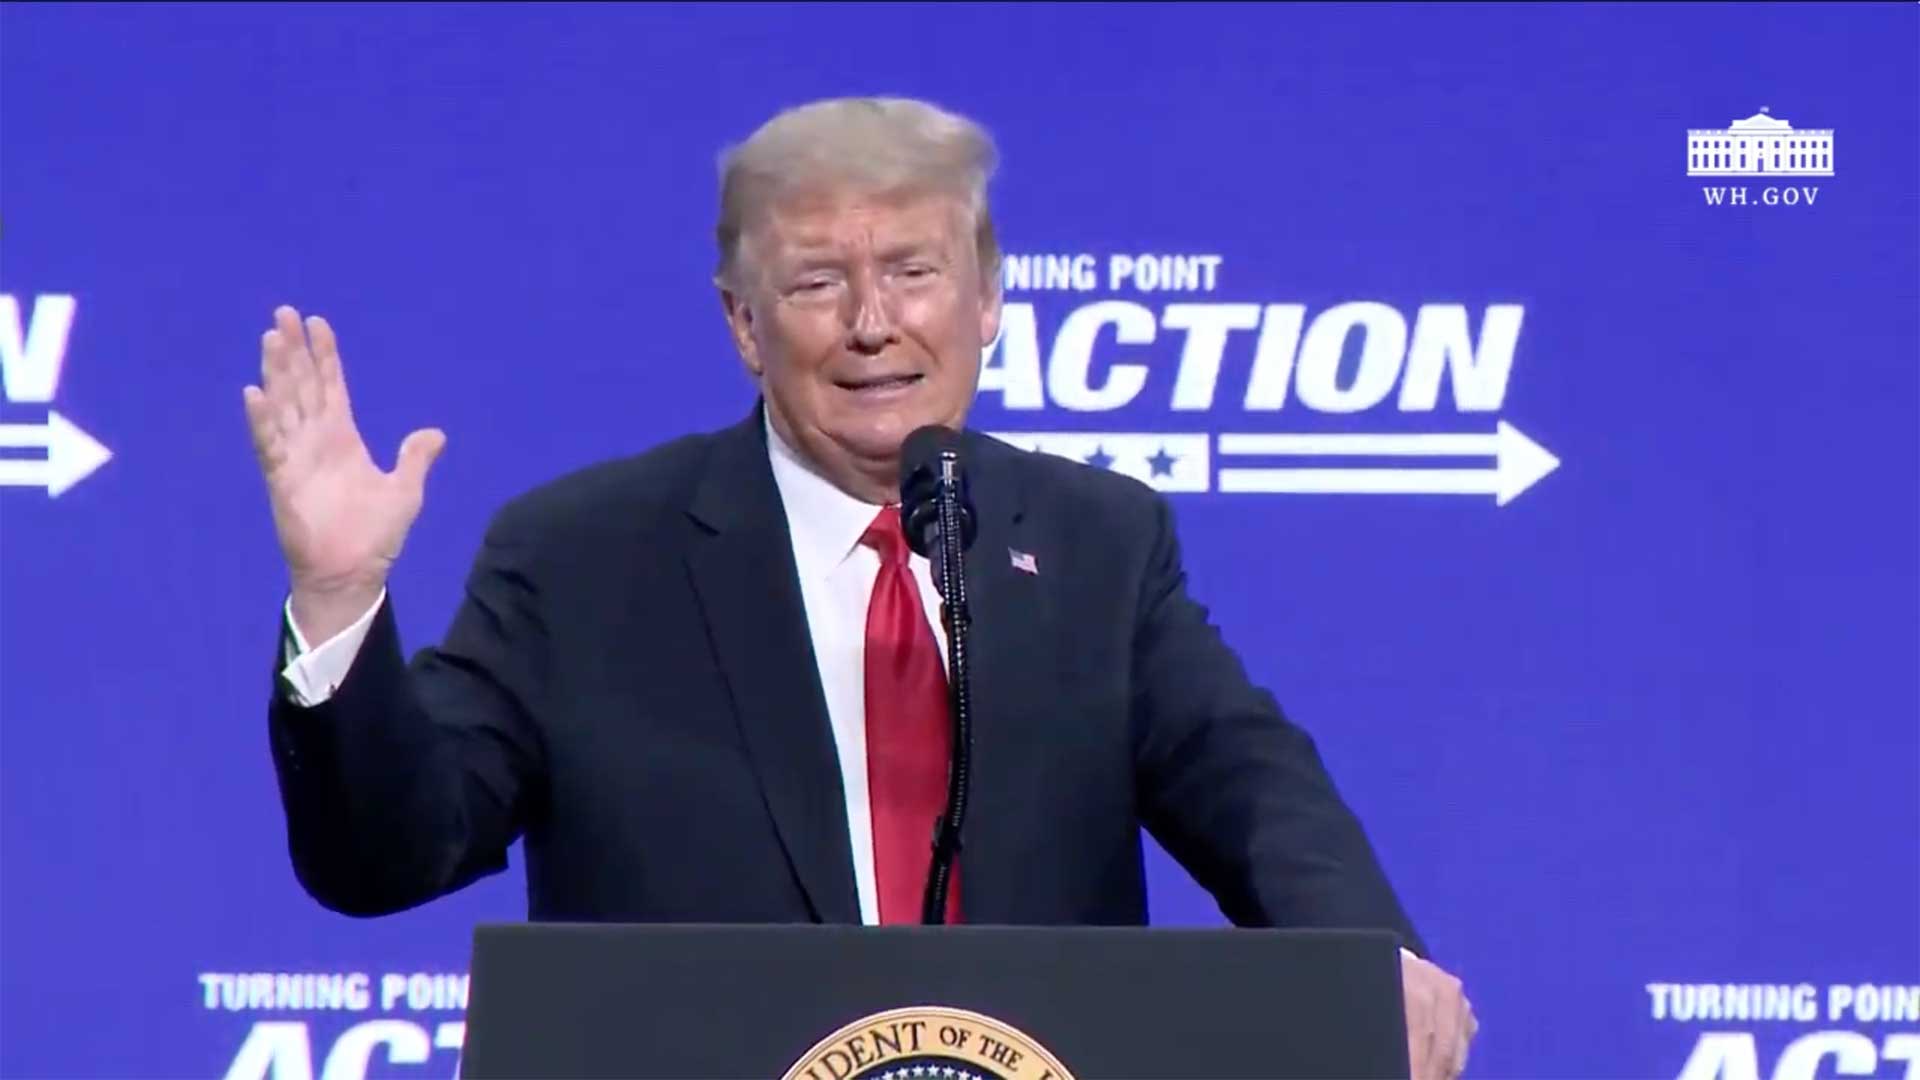 President Trump speaks at a June 23 event in Phoenix, in this still image from White House video of the event.